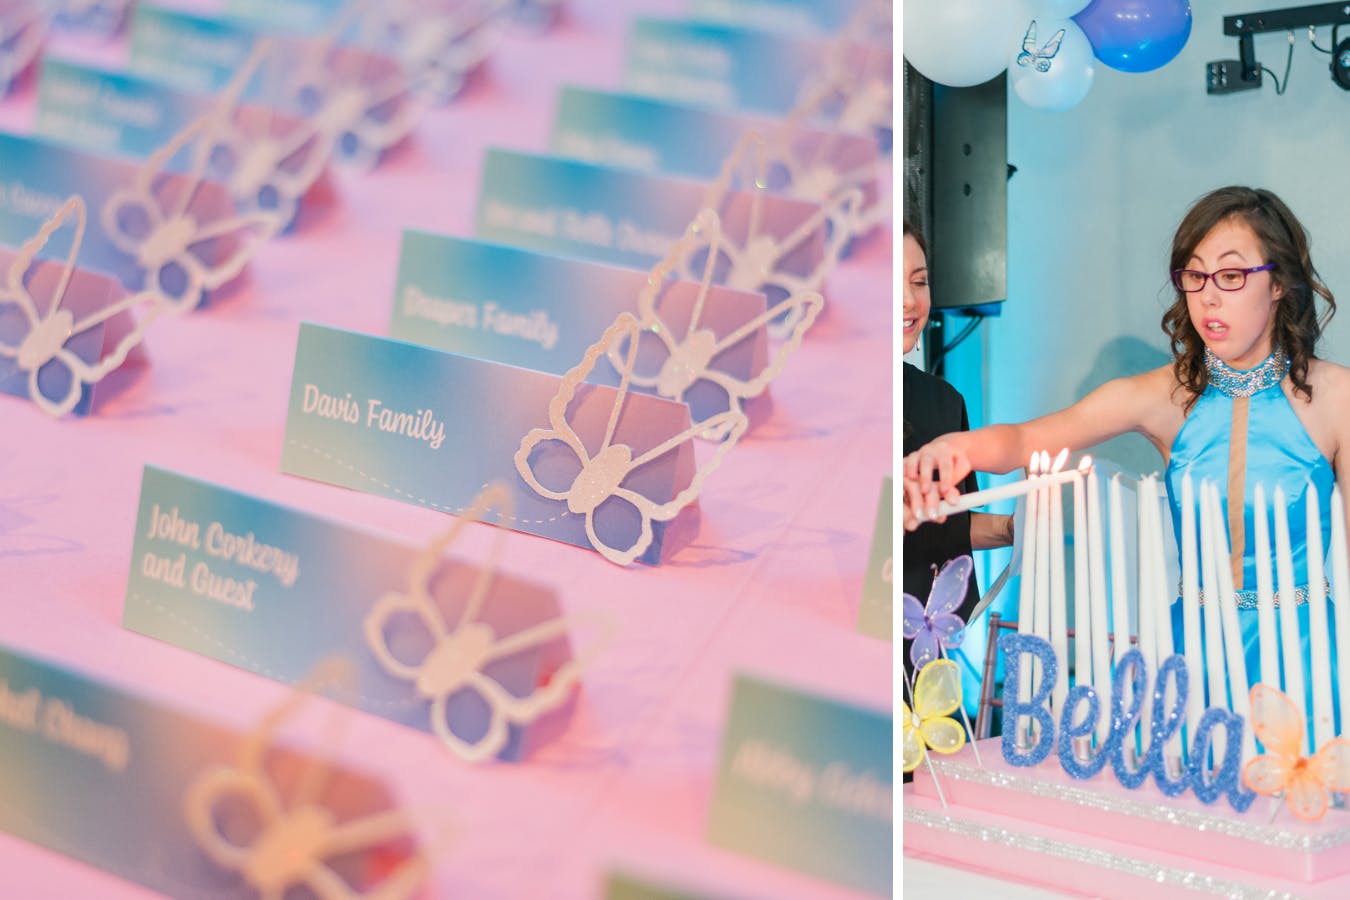 Taylor Swift theme quince escort cards and cake in pastel colors | PartySlate